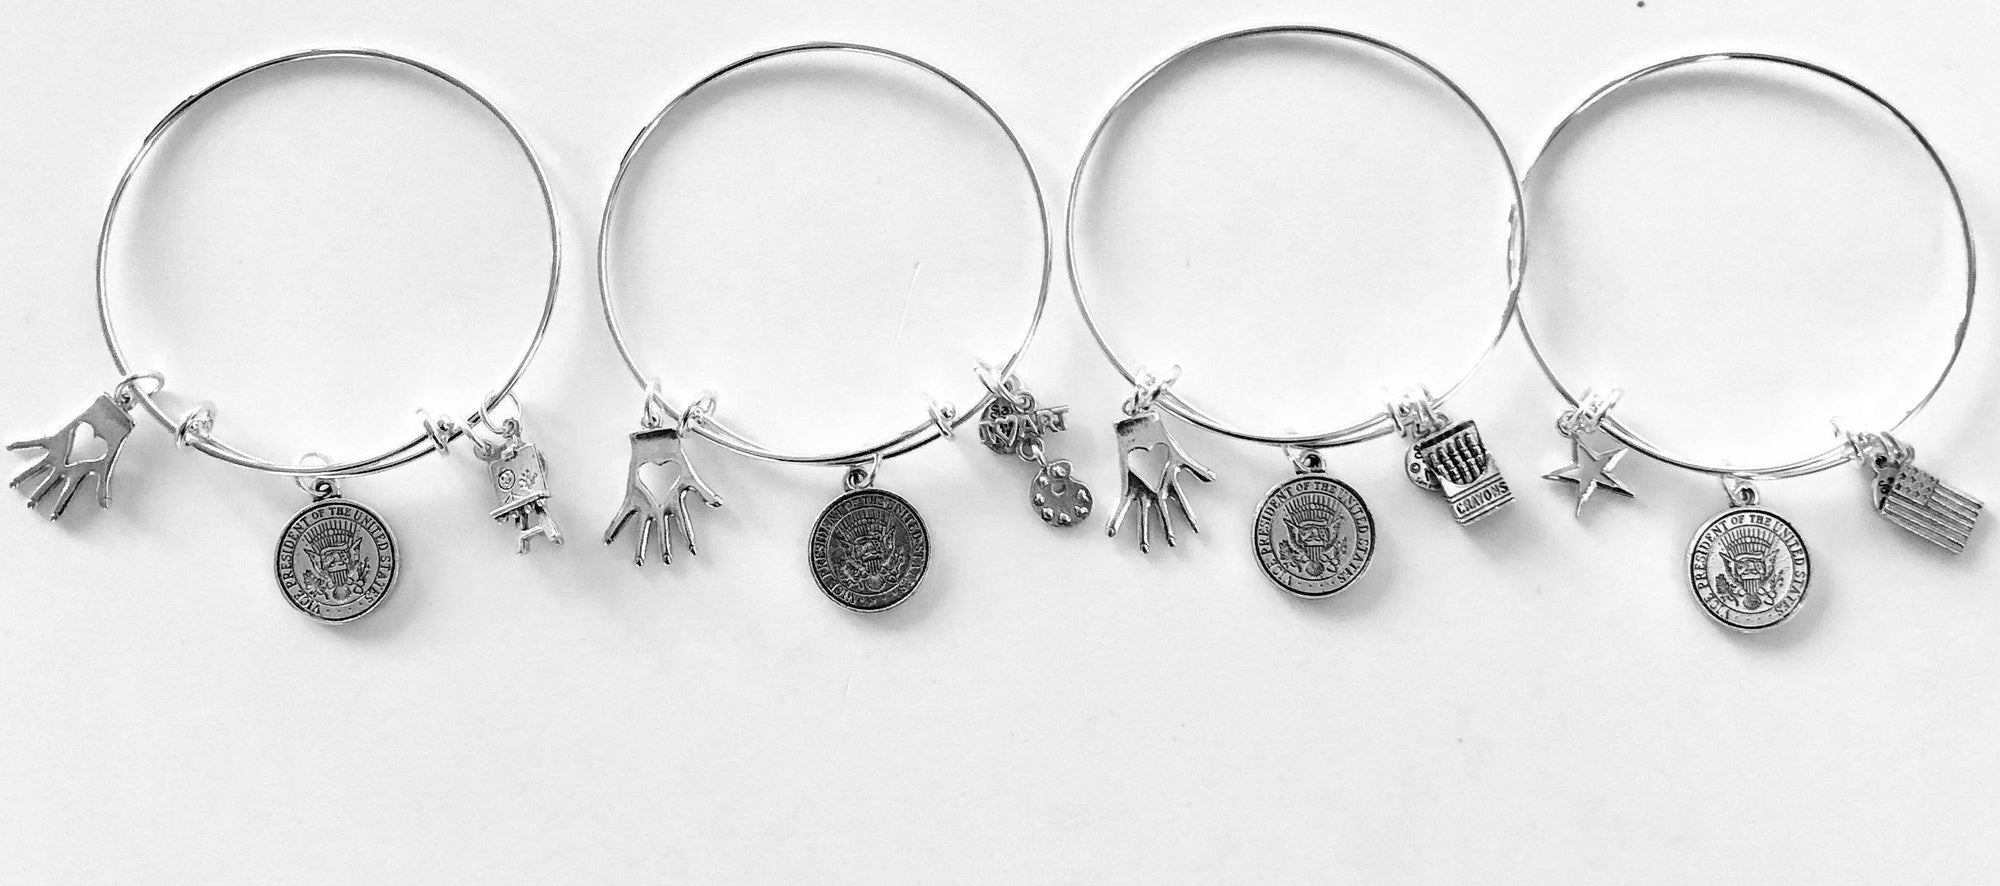 Vice Presidents Art Therapy and America Land That I Love Bangle Bracelet by Karen Pence - Set of Four-Watchus